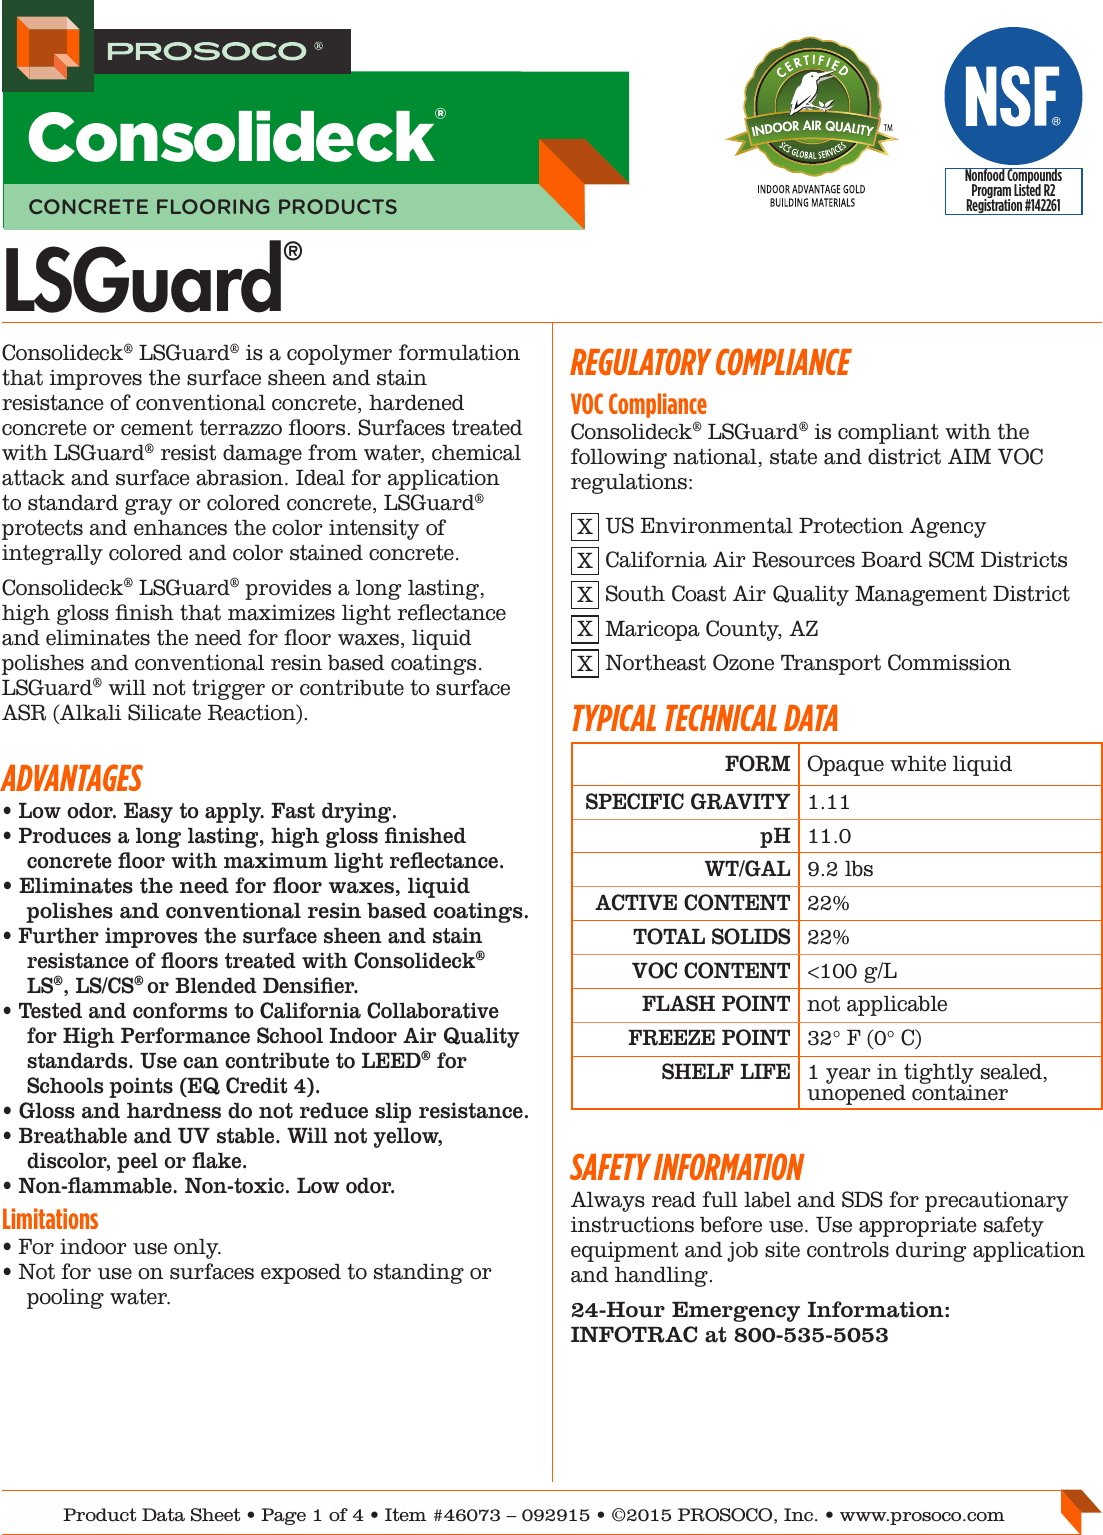 Page 1 of 4 - CD LSGuard PDS 092915 C